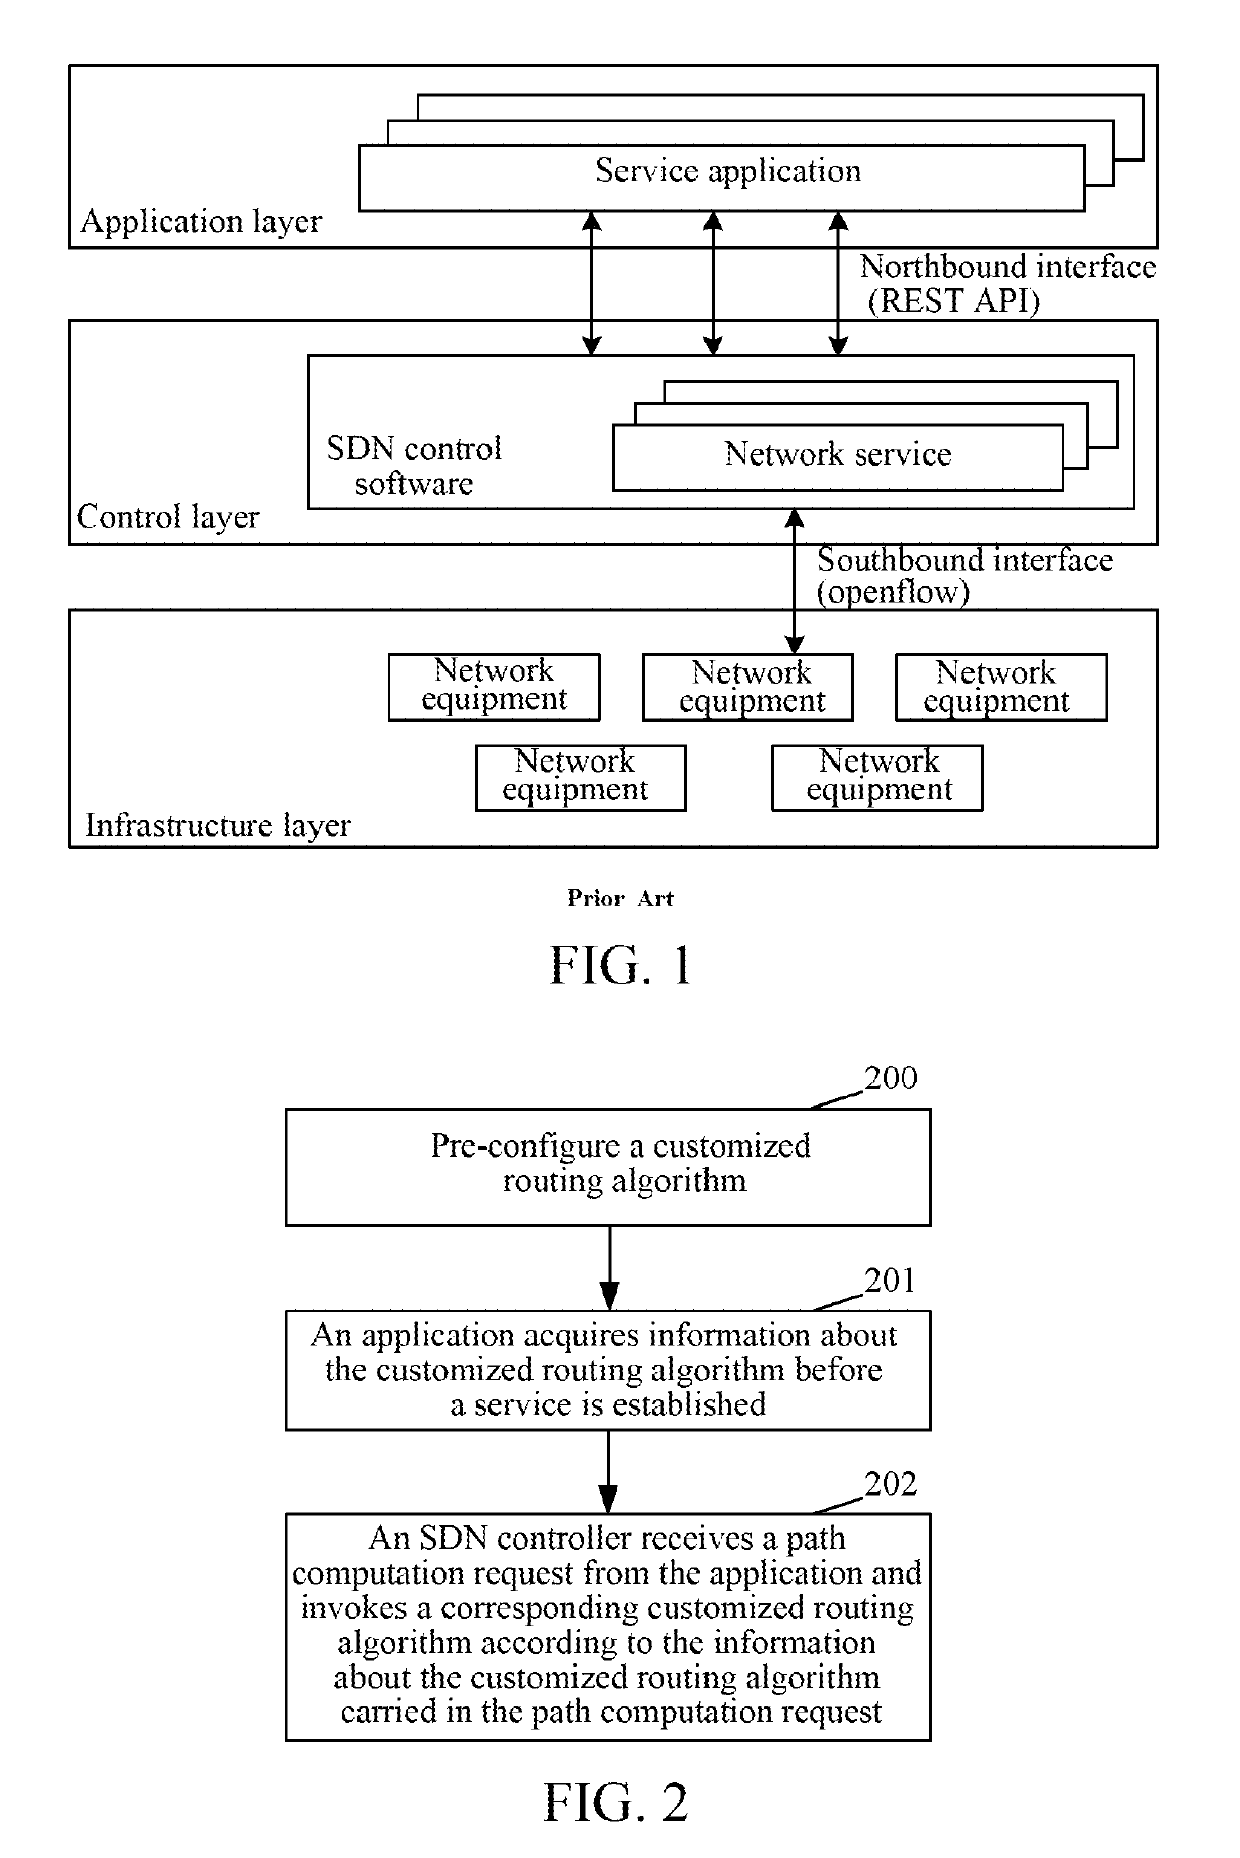 Method for calling routing algorithm, SDN controller, and SDN-OAF